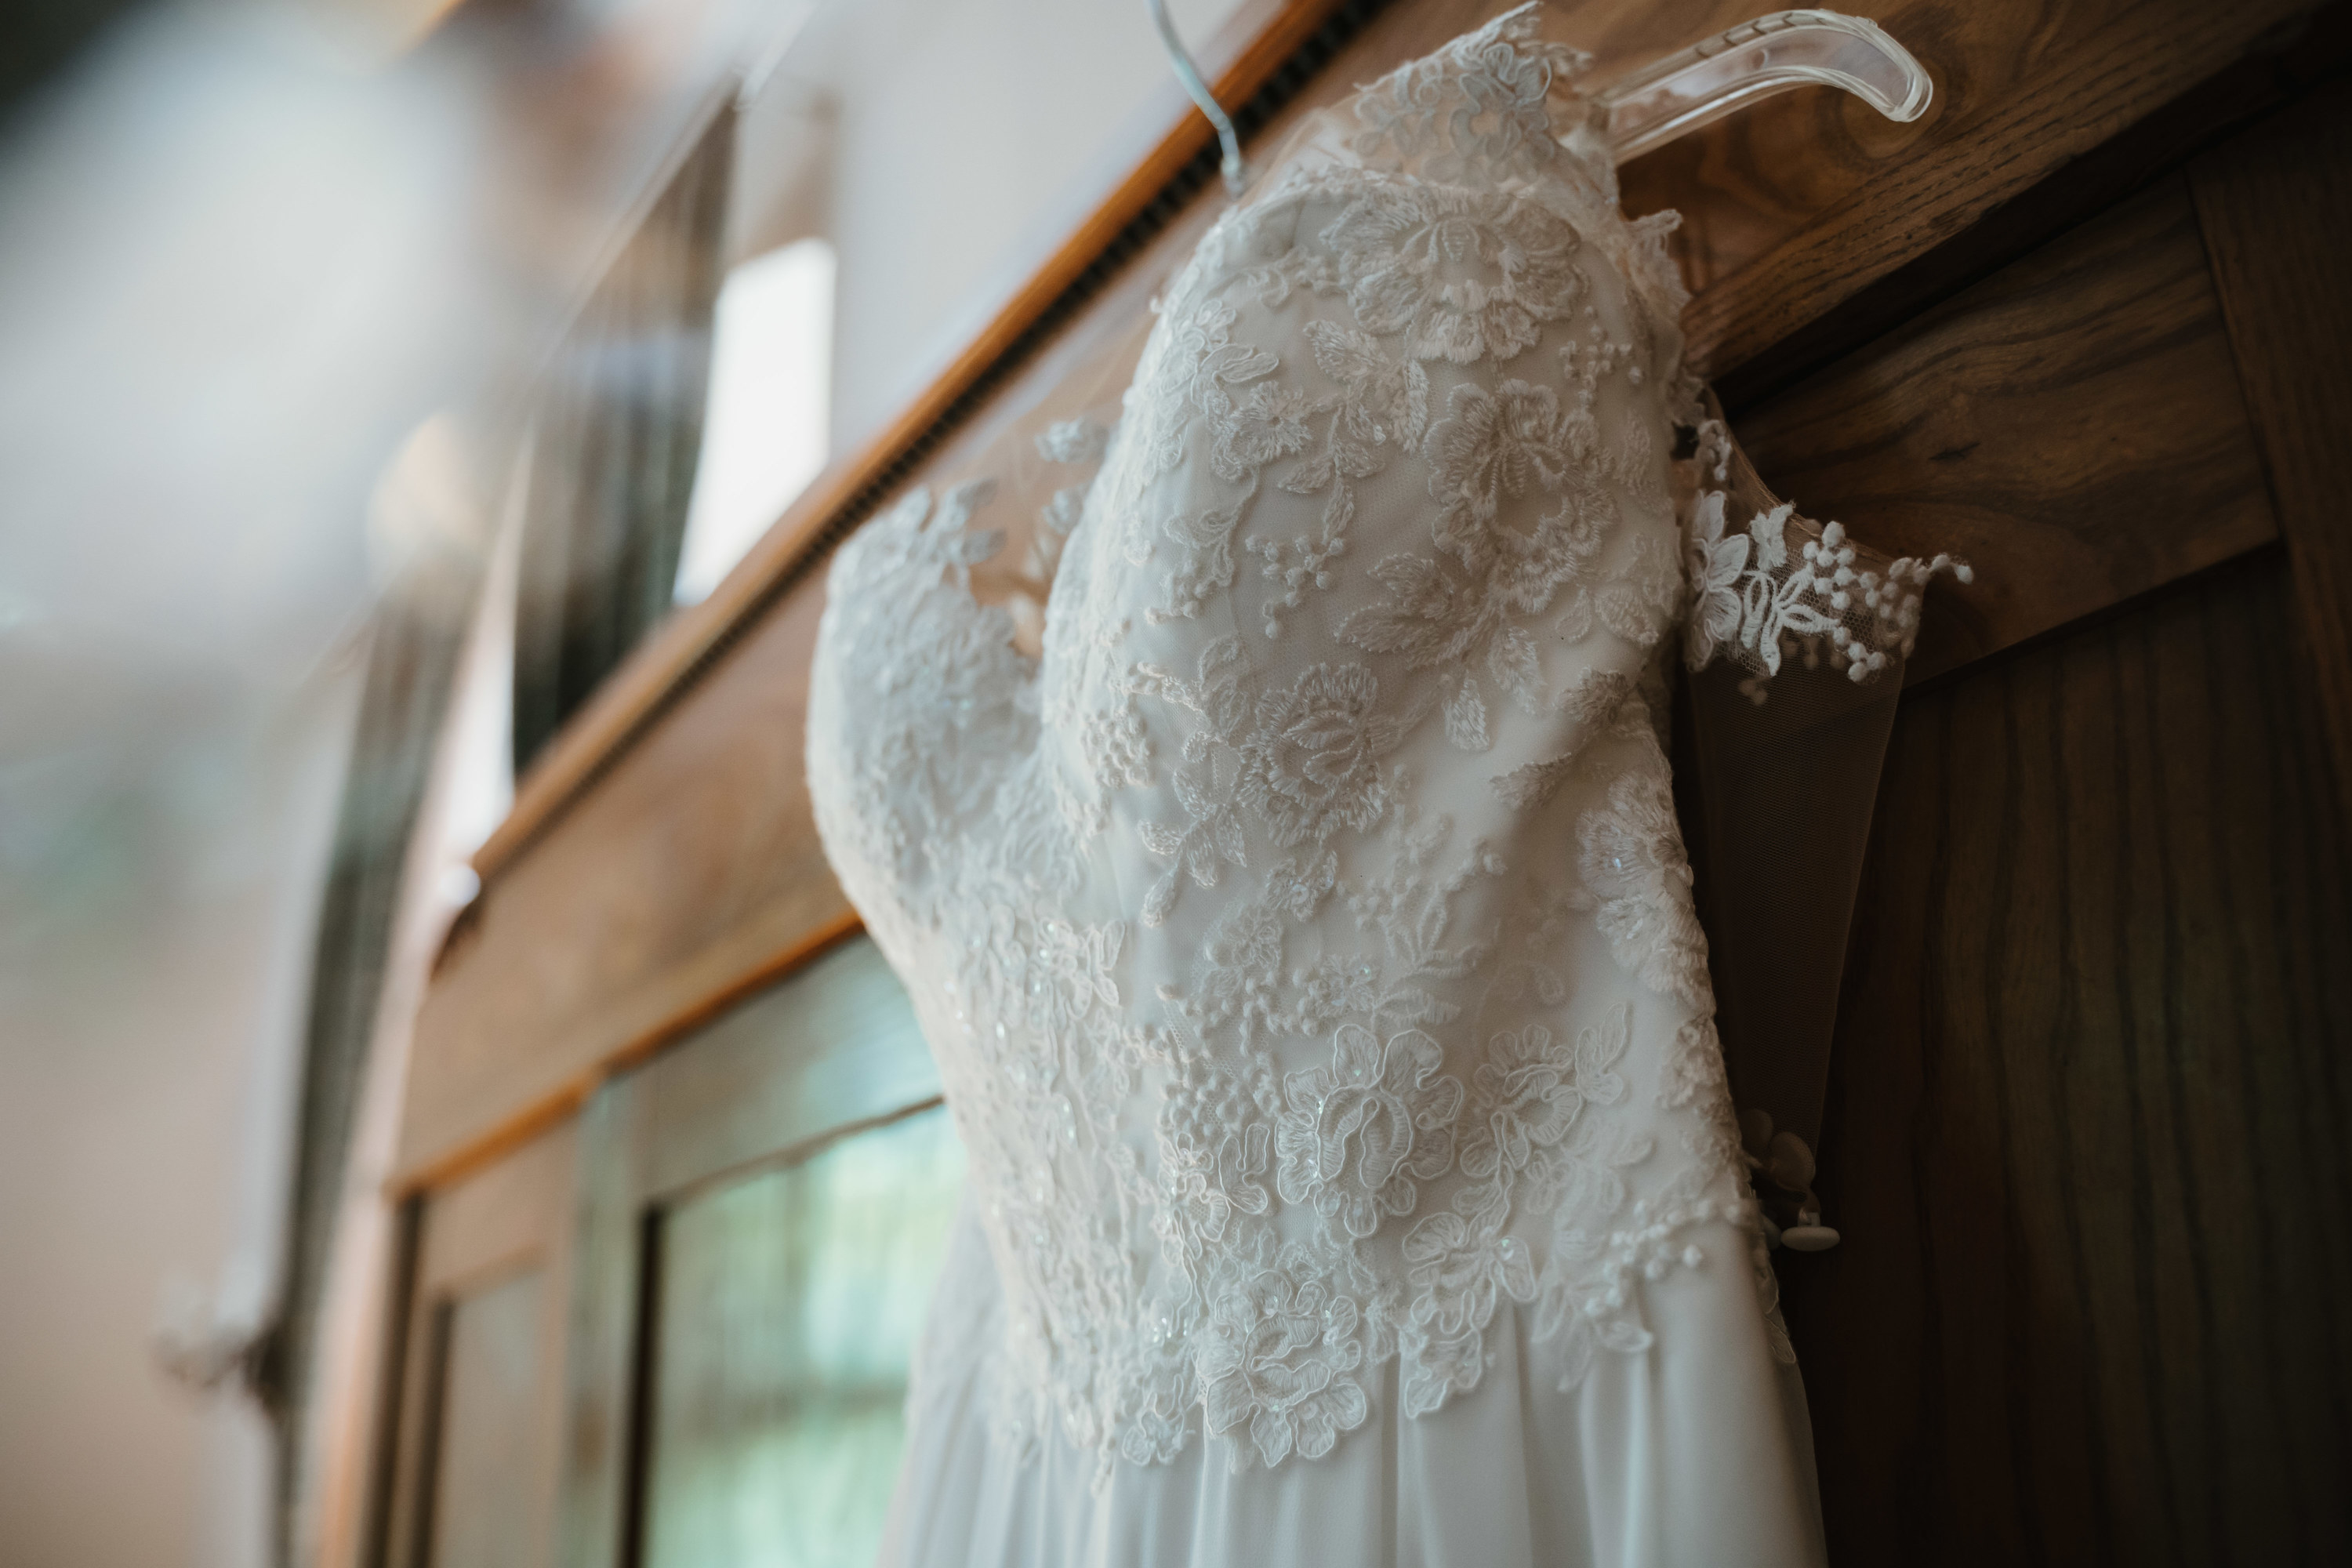 A wedding dress hanging on a mantle